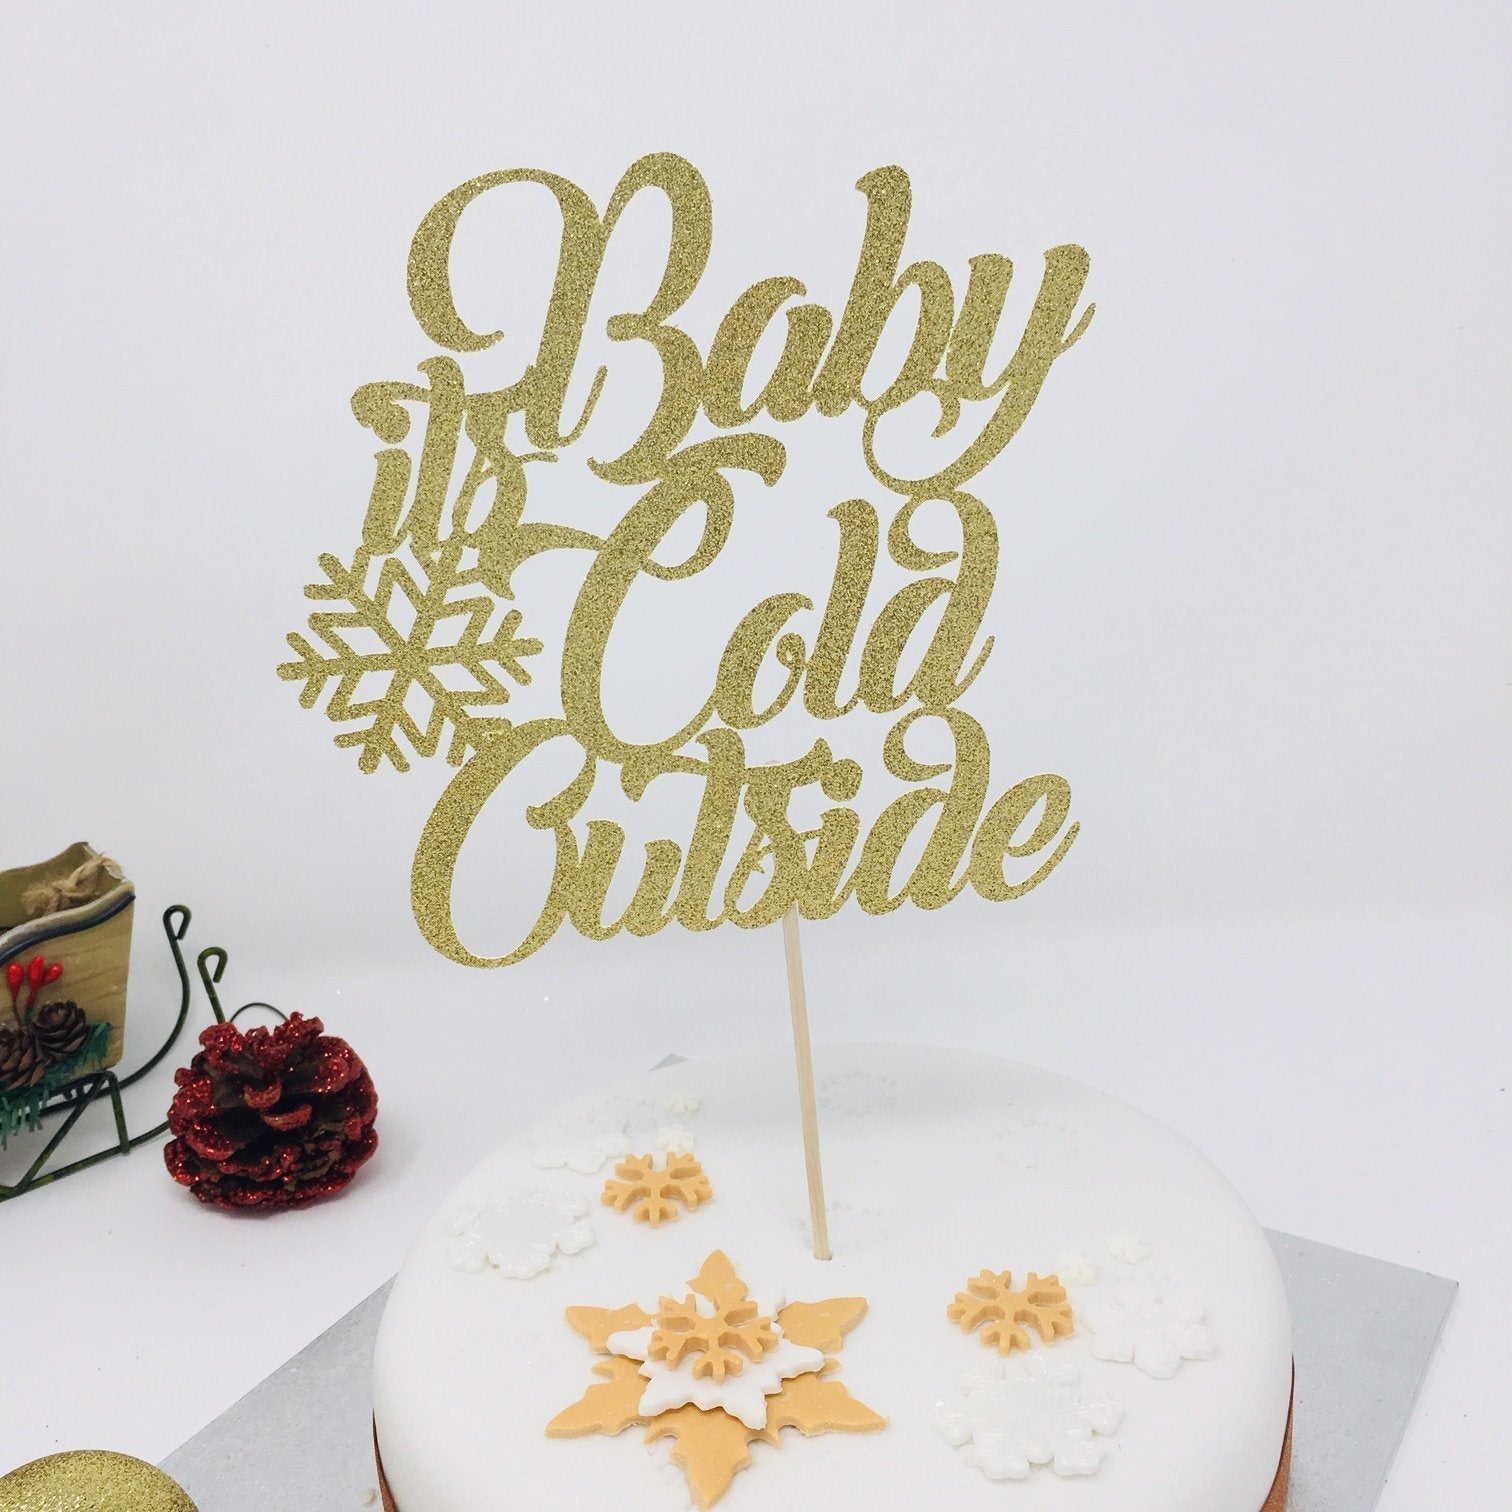 Baby it's Cold Outside Cake Topper with Snowflake